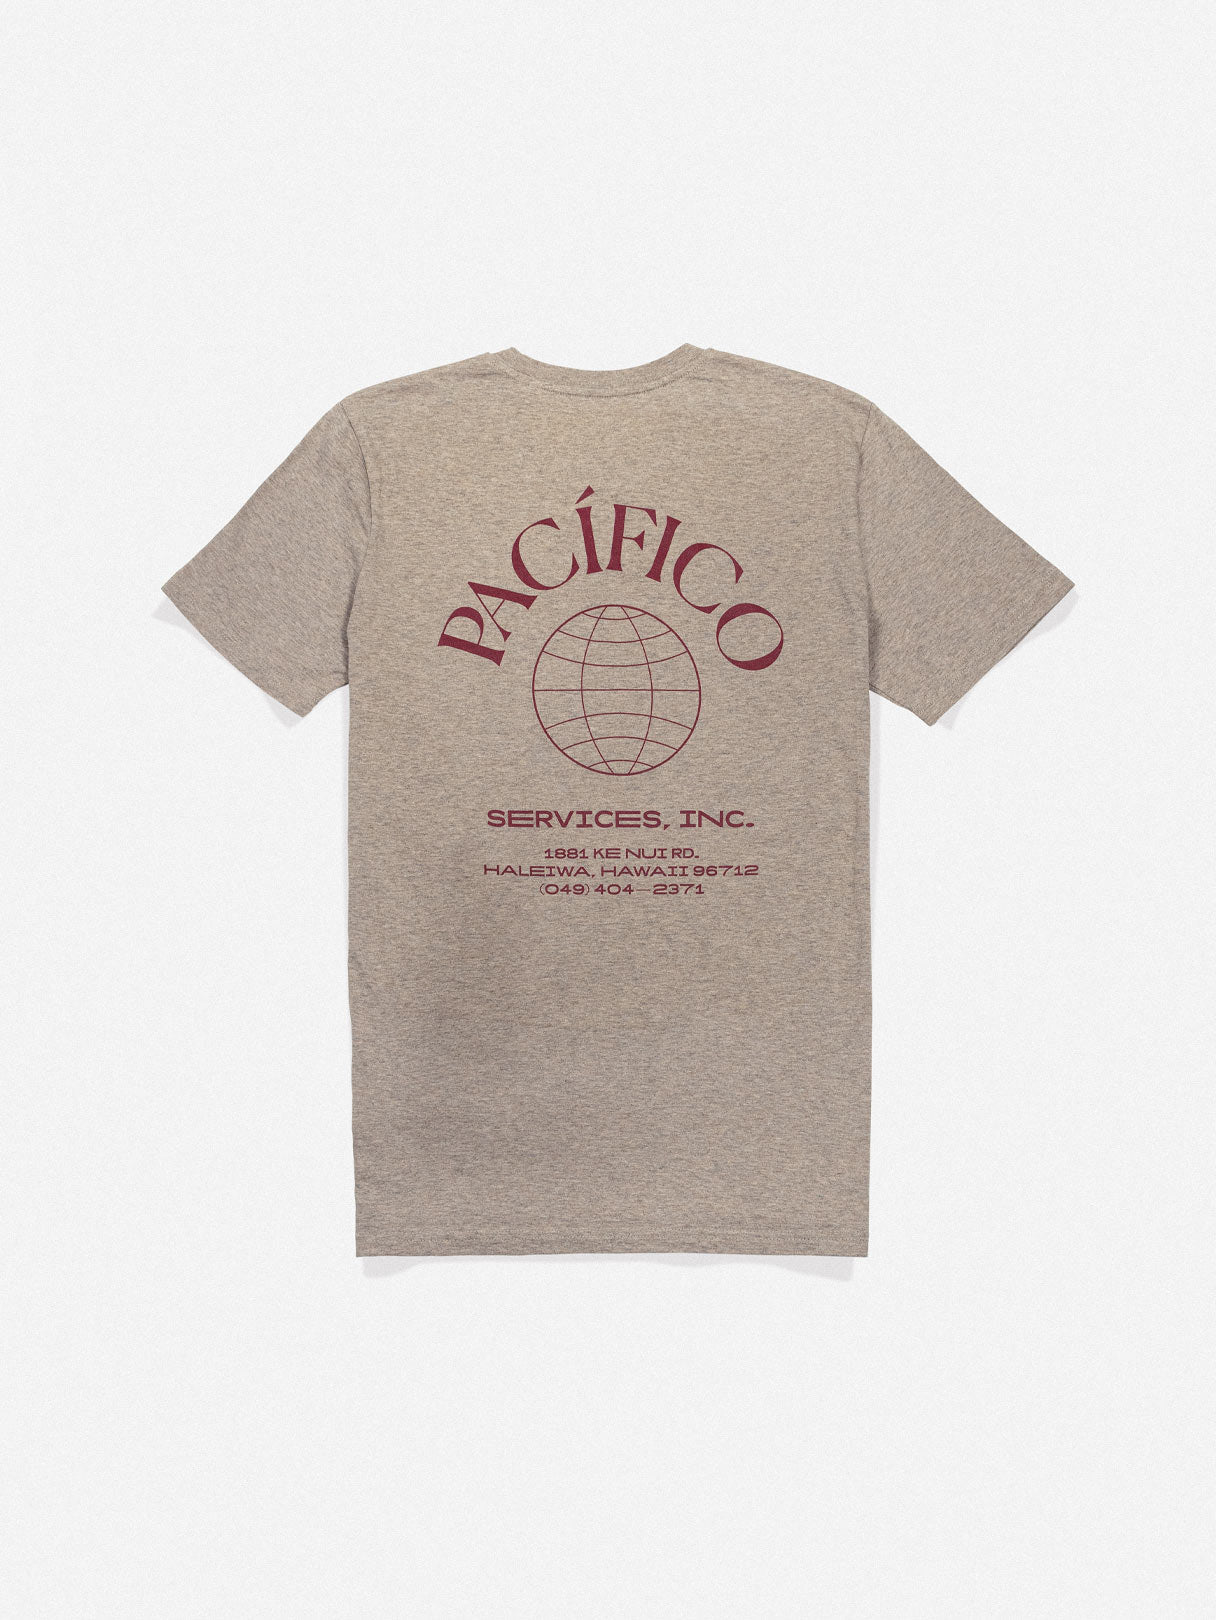 Pacifico — Men's T-Shirt - Youth Lagoon